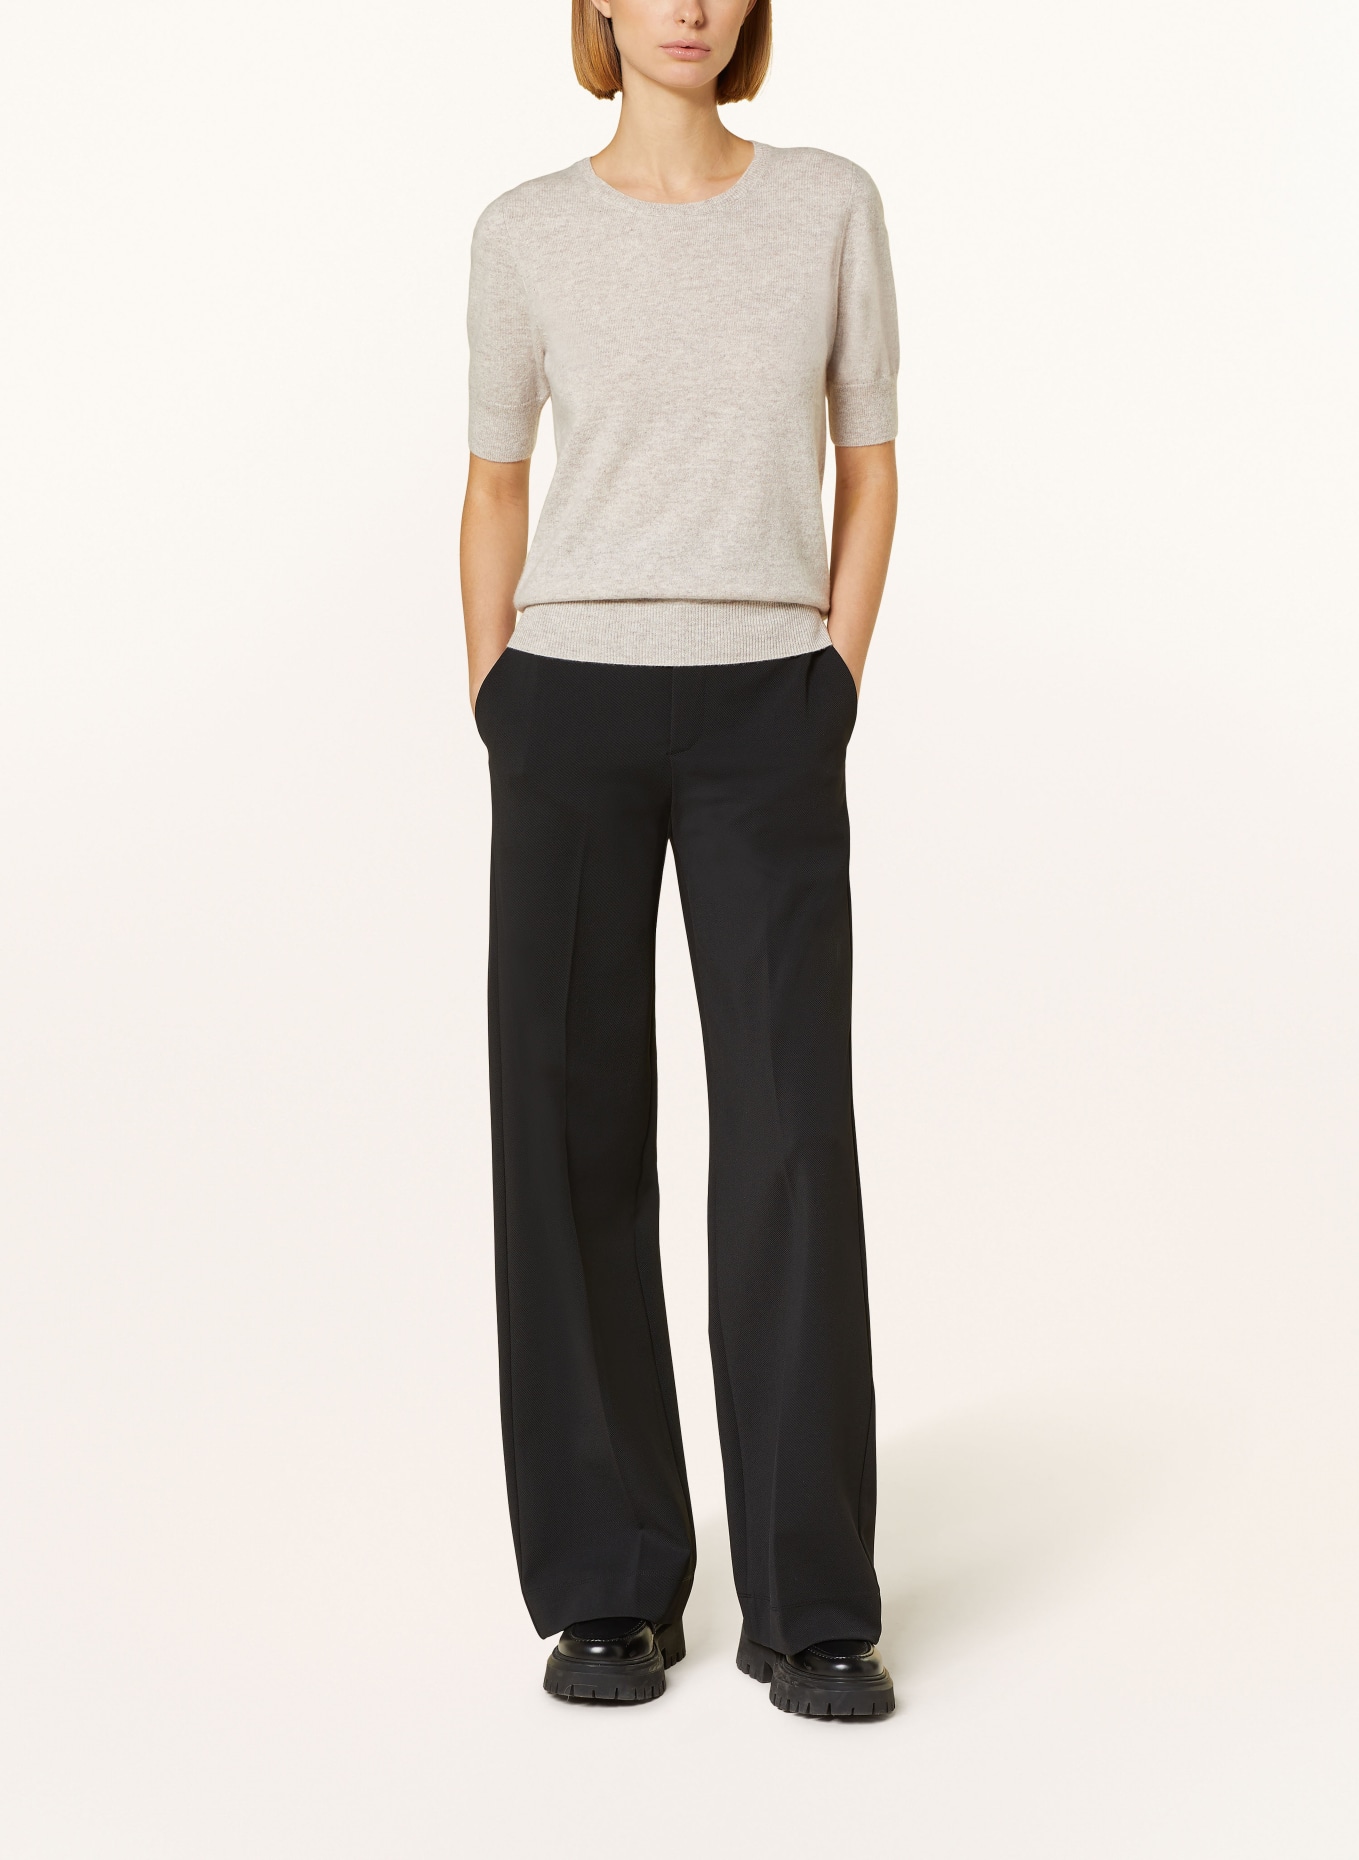 REPEAT Knit shirt in cashmere, Color: BEIGE (Image 2)